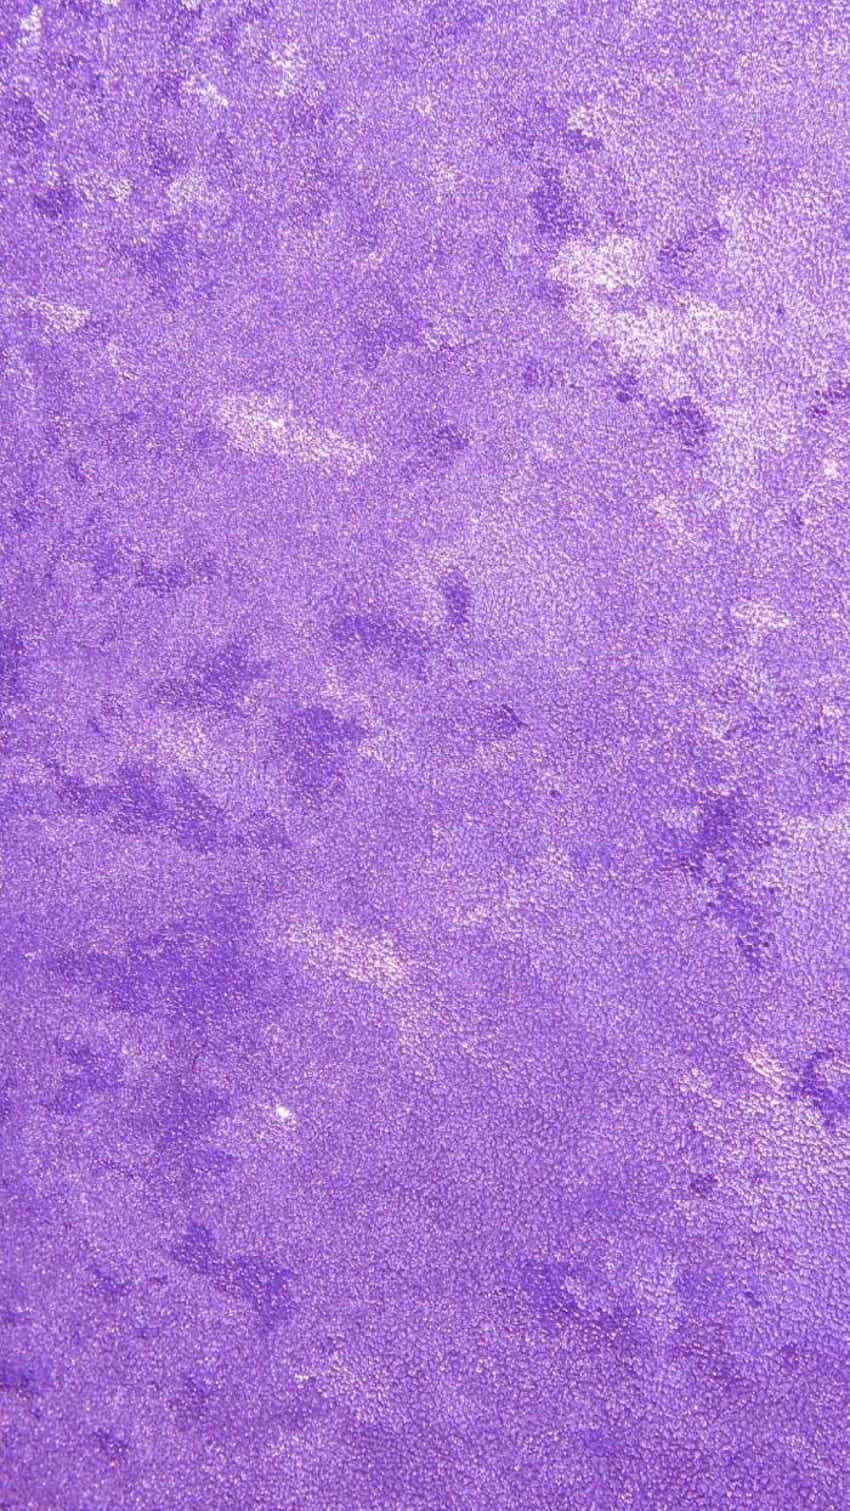 Bright, abstract purple textured background